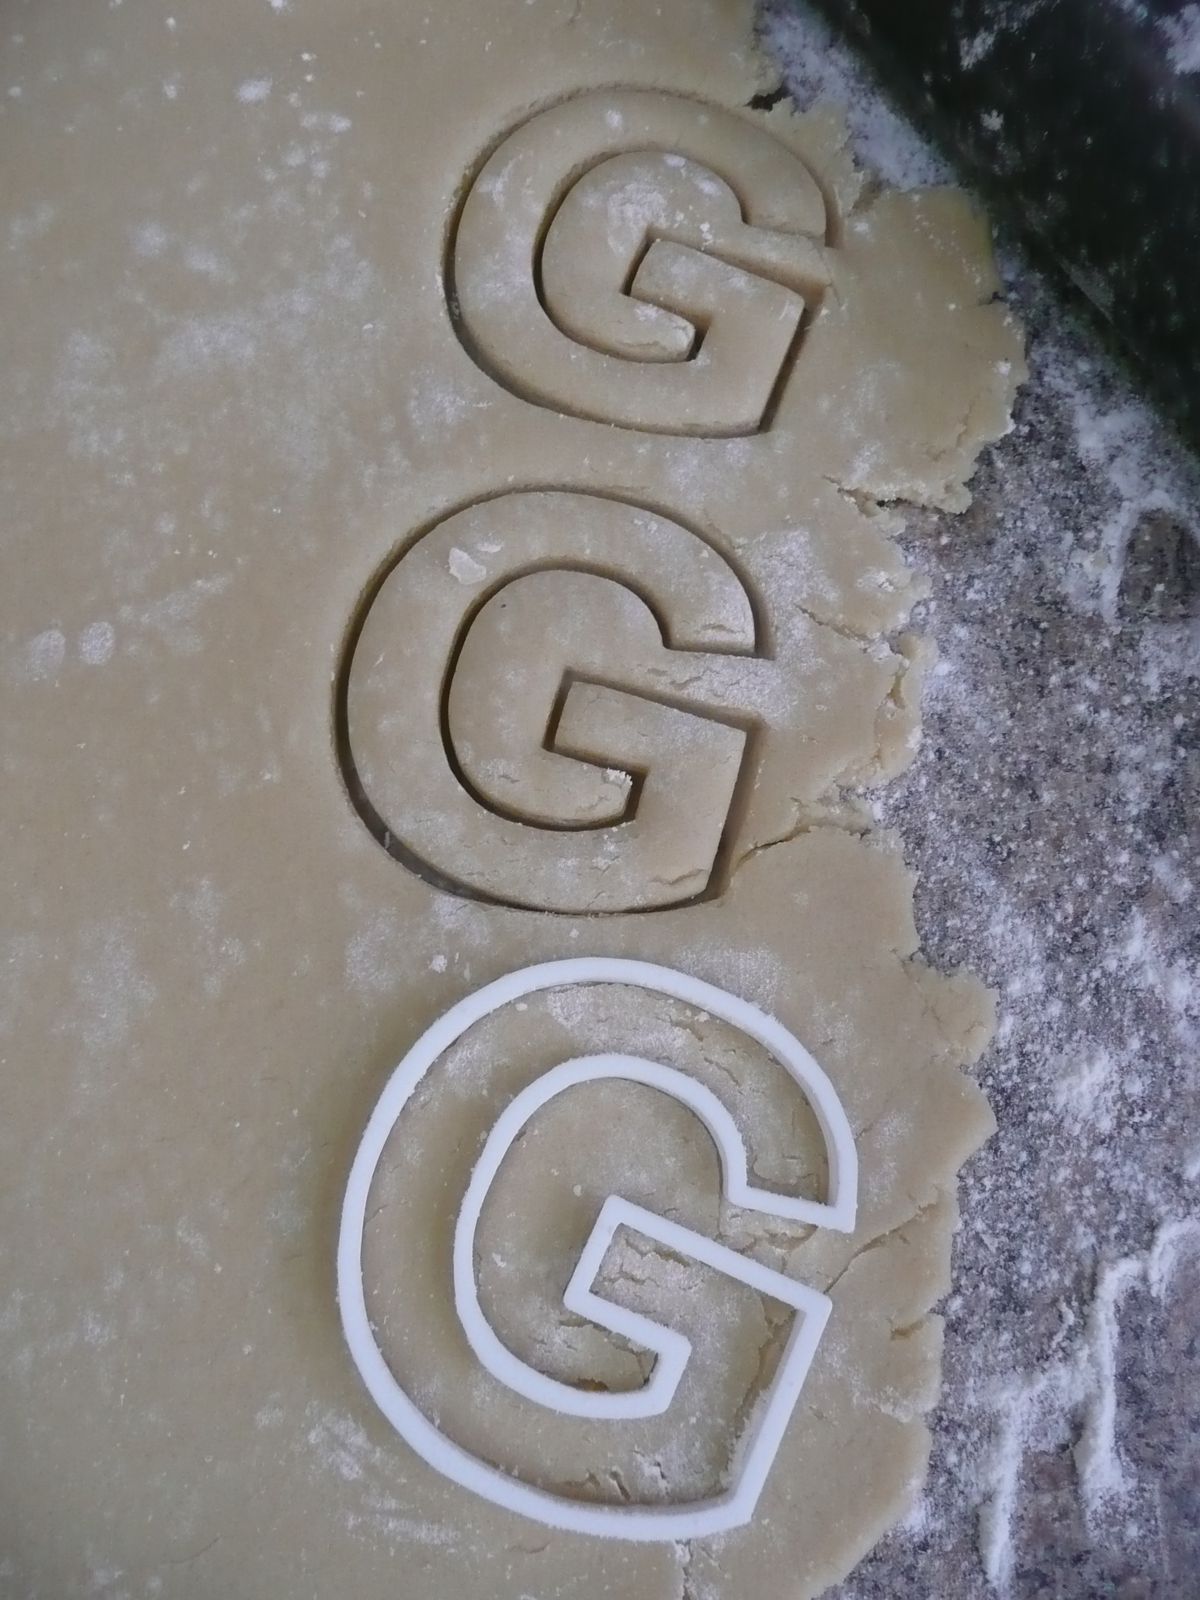 Letter G Initial Alphabet Letters Cookie Cutter Baking Tool USA PR107G